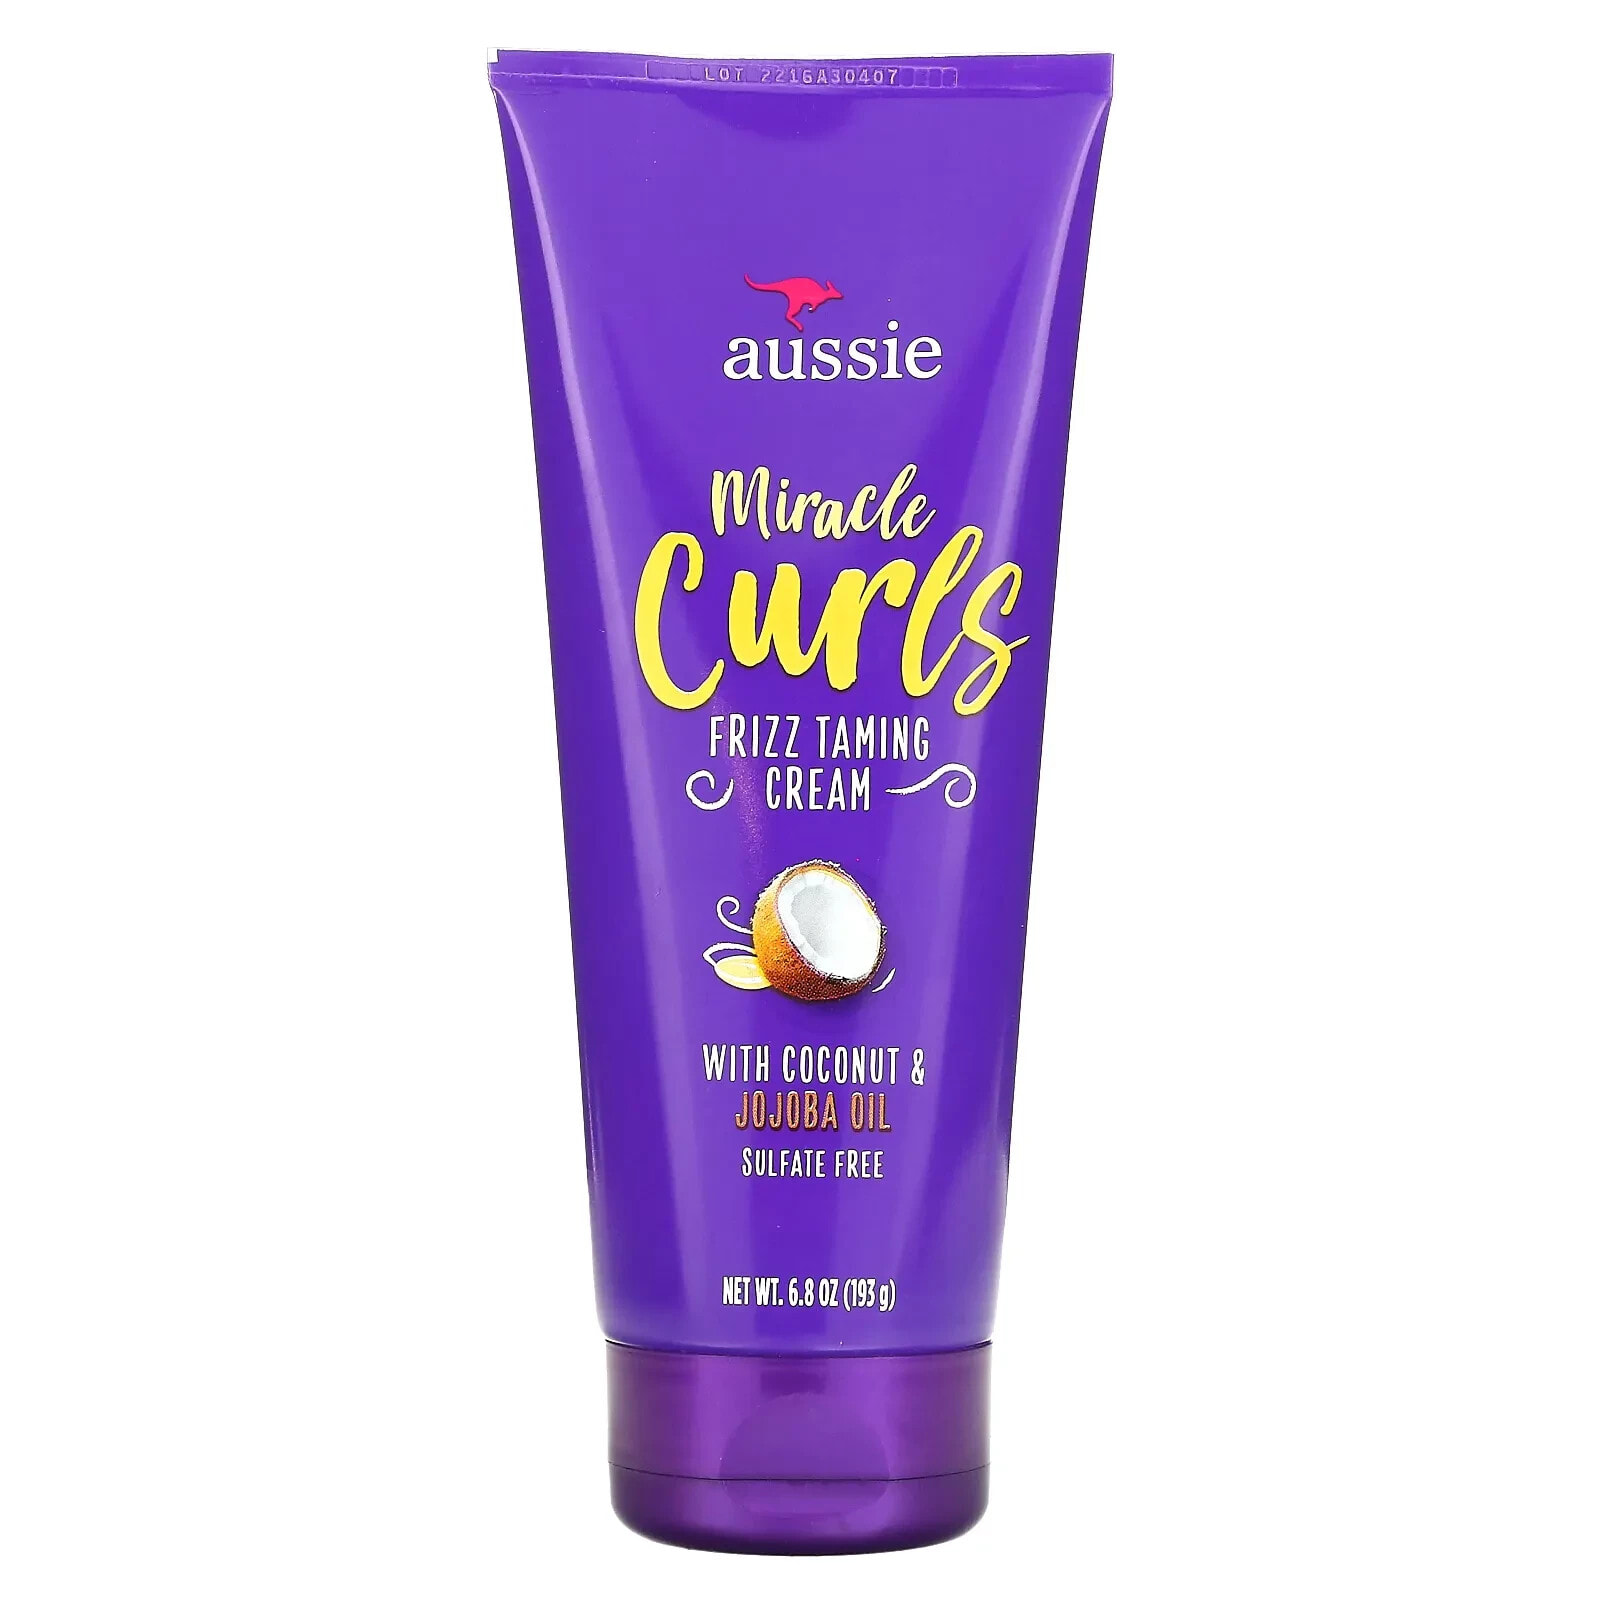 Miracle Curls, Frizz Taming Cream with Coconut & Jojoba Oil, 6.8 oz (193 g)